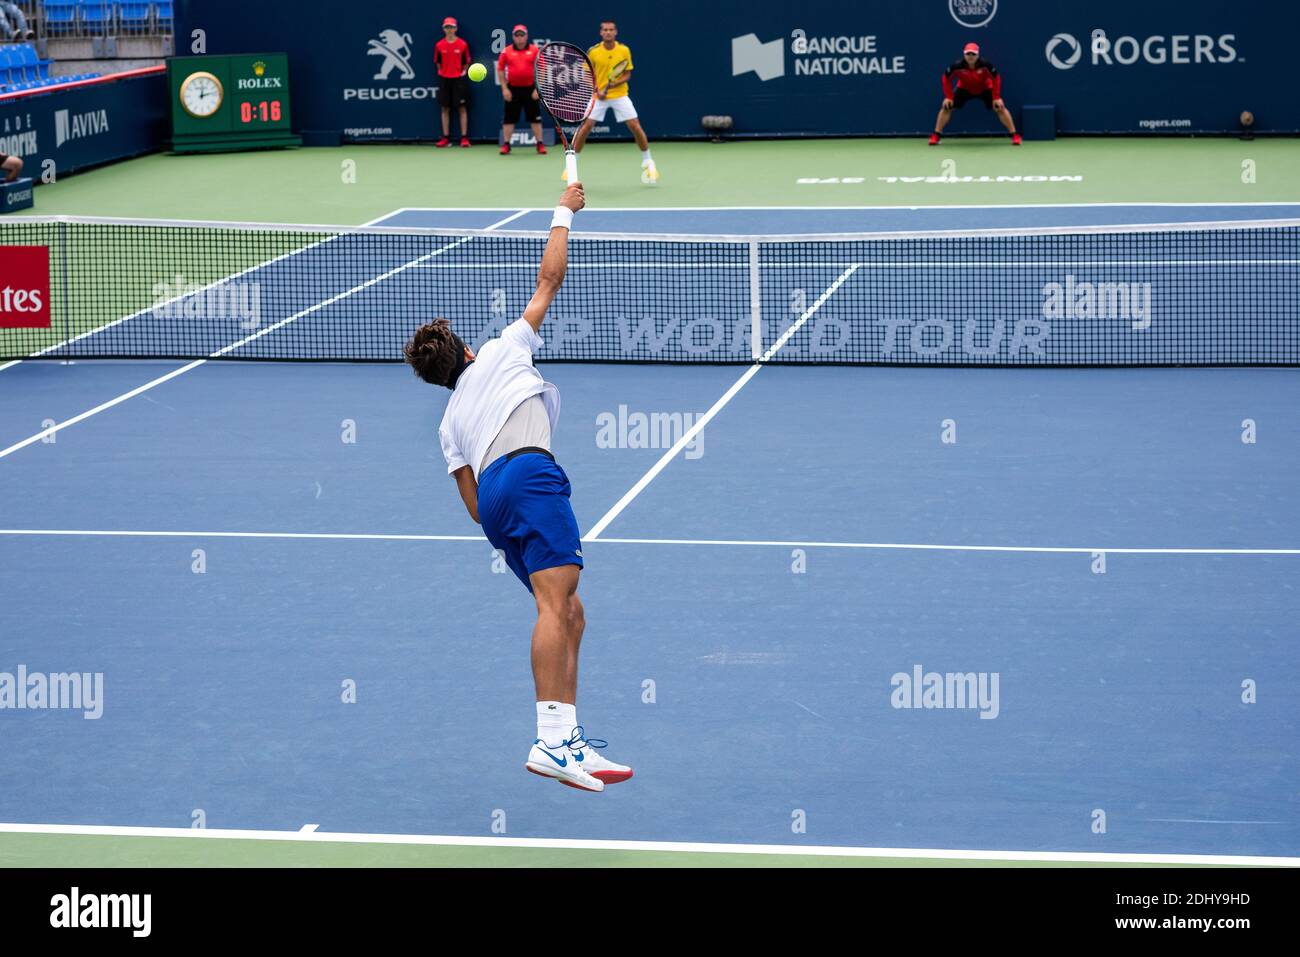 Montreal, Canada - Aujgust 5th, 2017: Pierre-Hugues Herbert practicing in the national bank during the Rogers Cup. Stock Photo